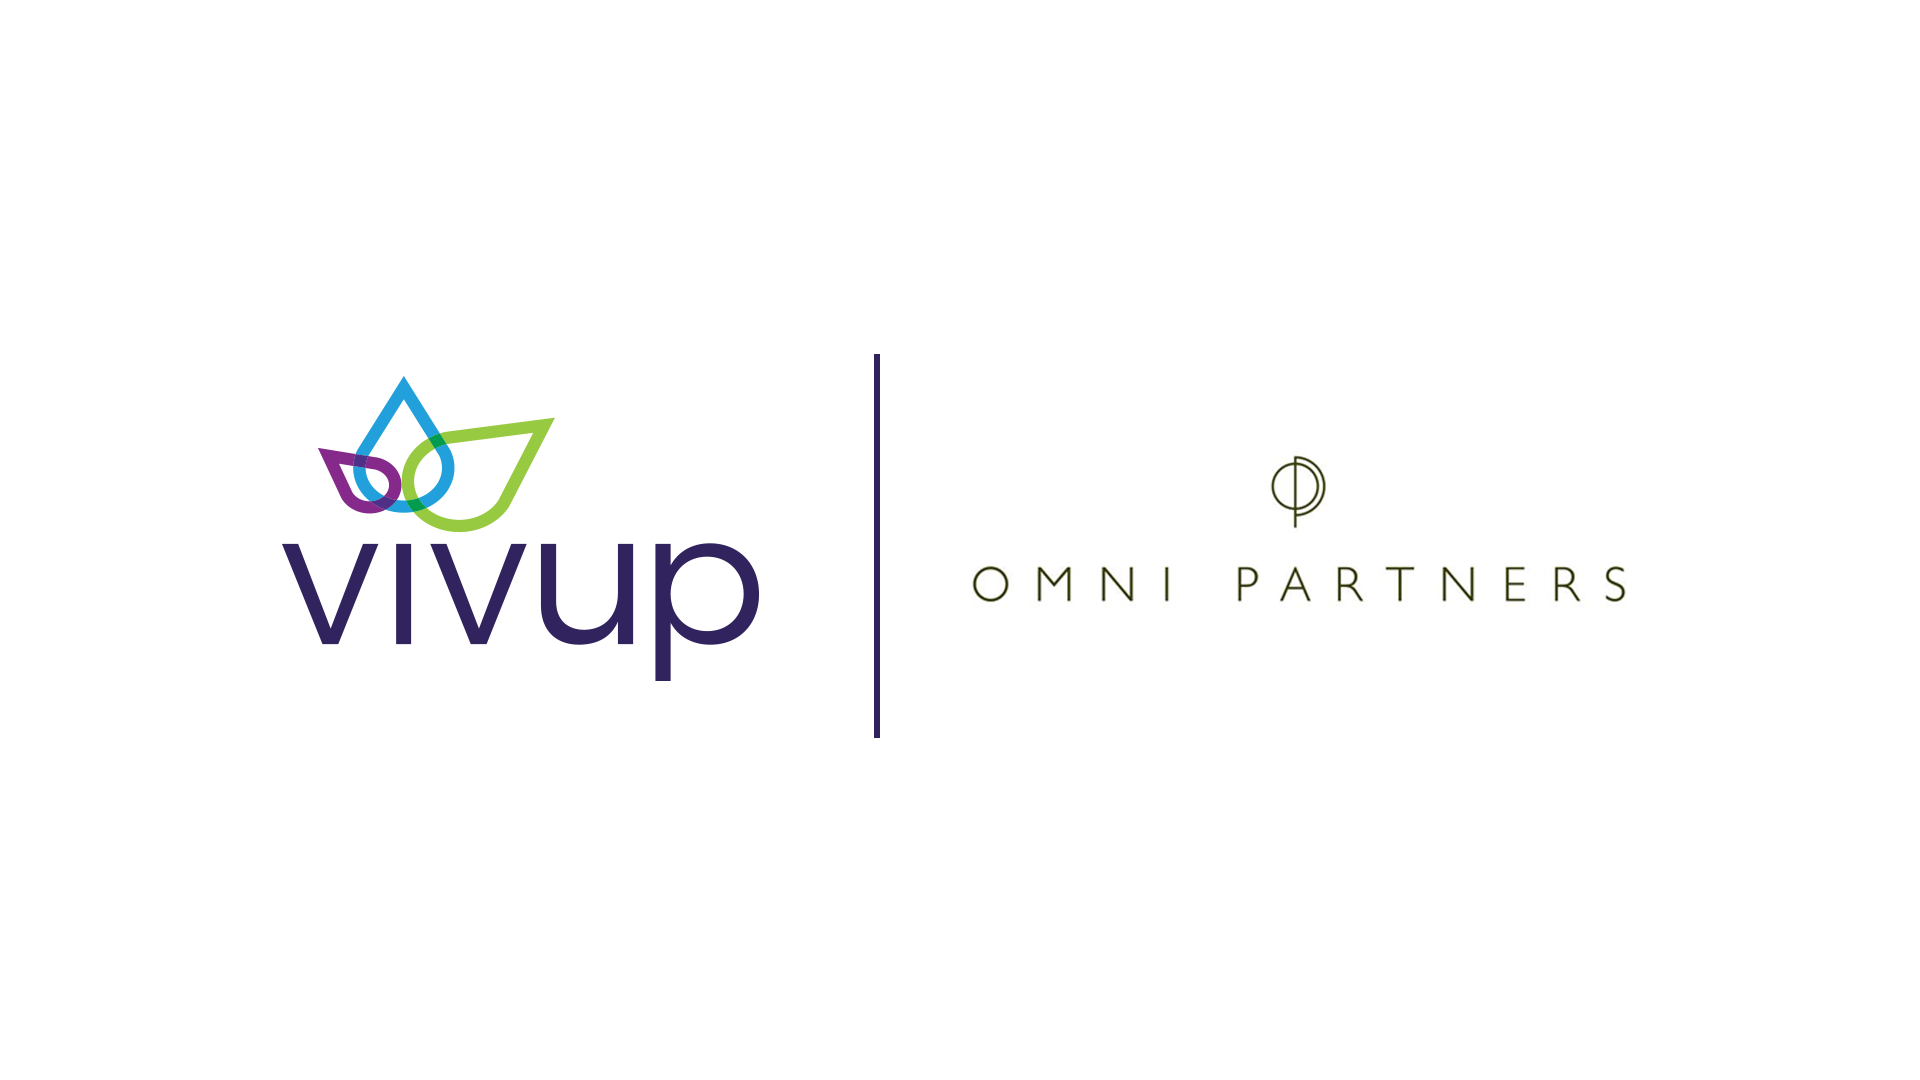 Vivup and Omni Partners logos on a partnership announcement